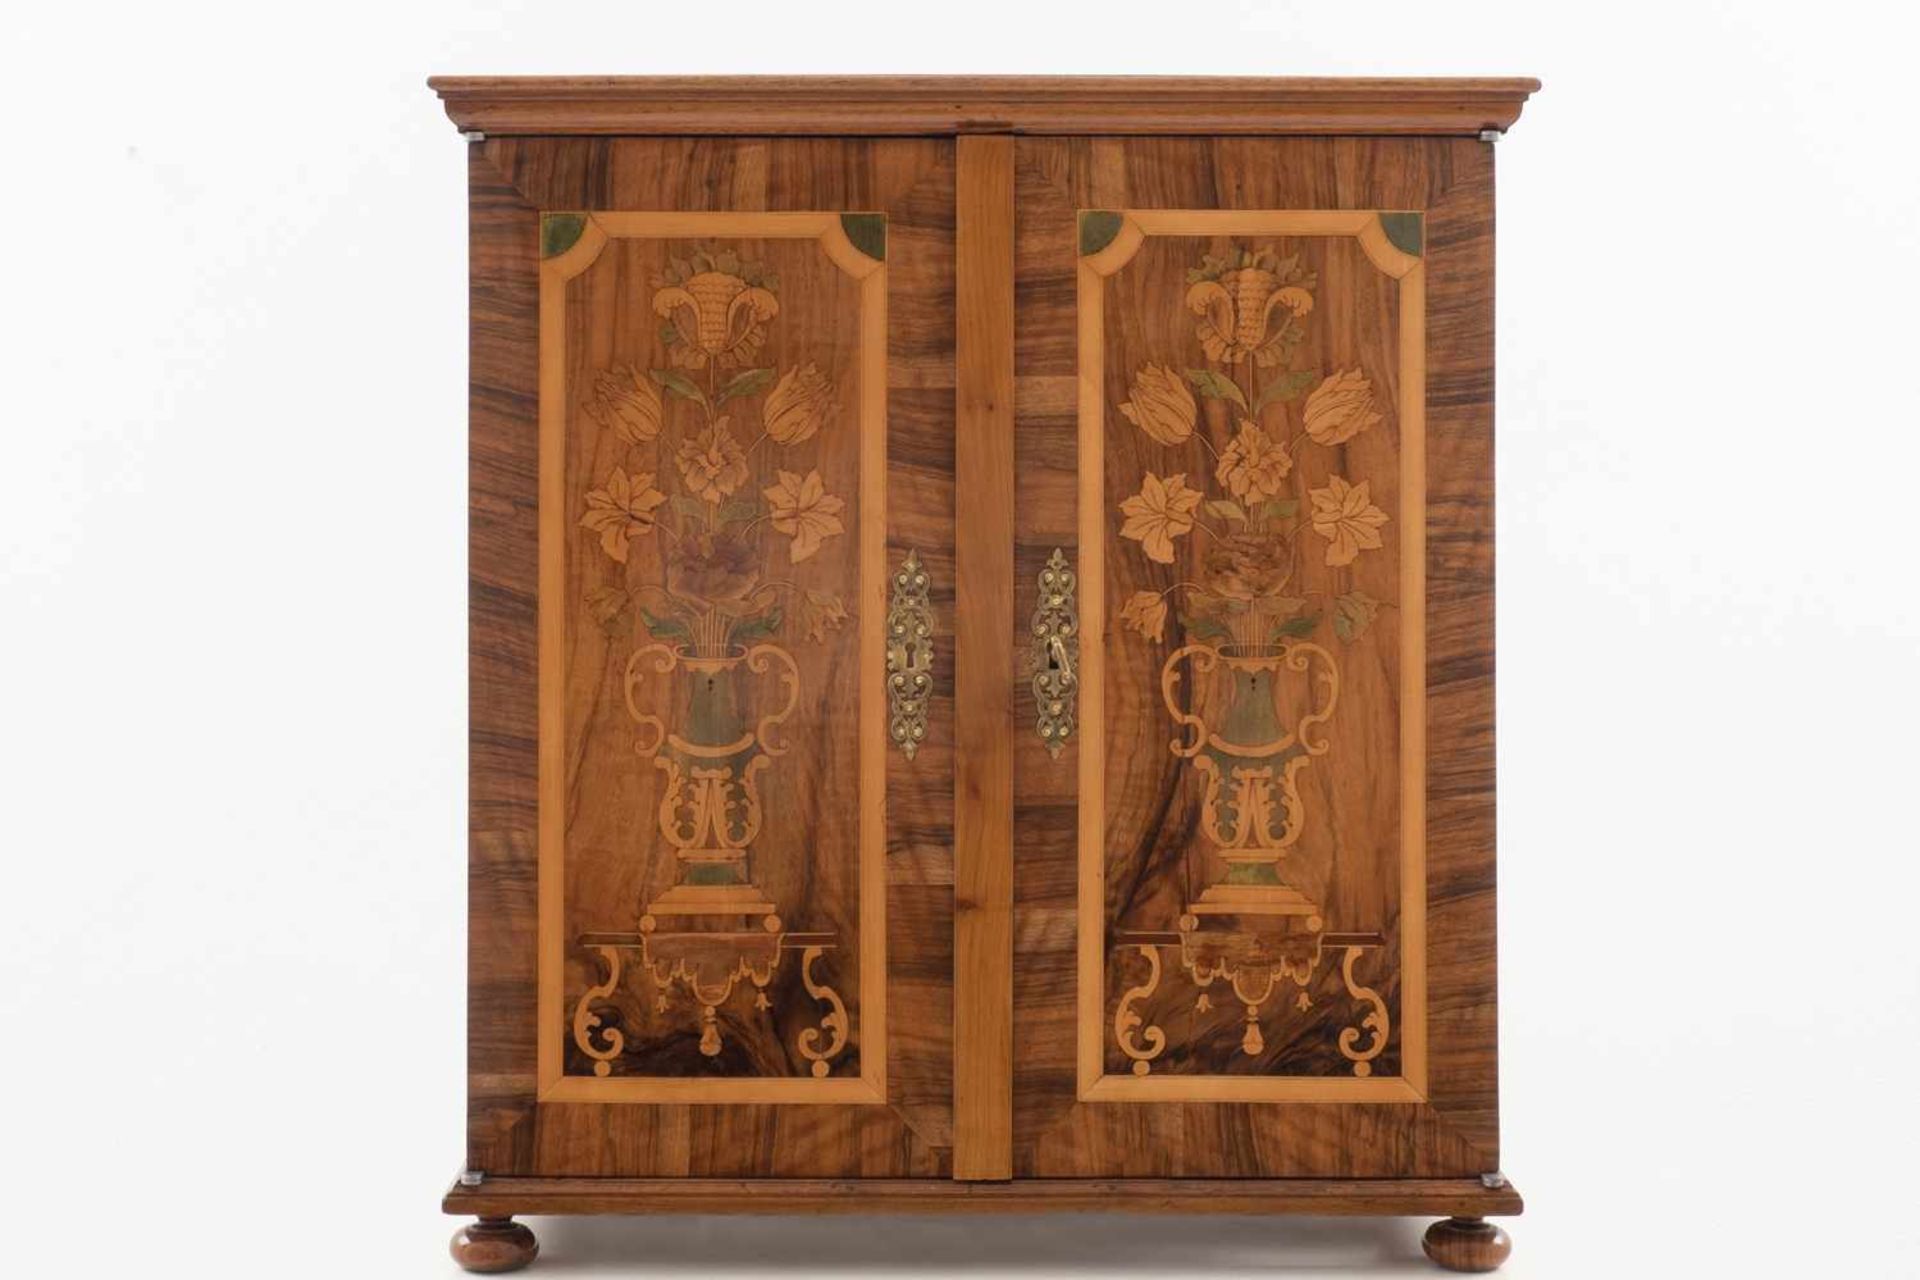 High cabinet with fine inlays